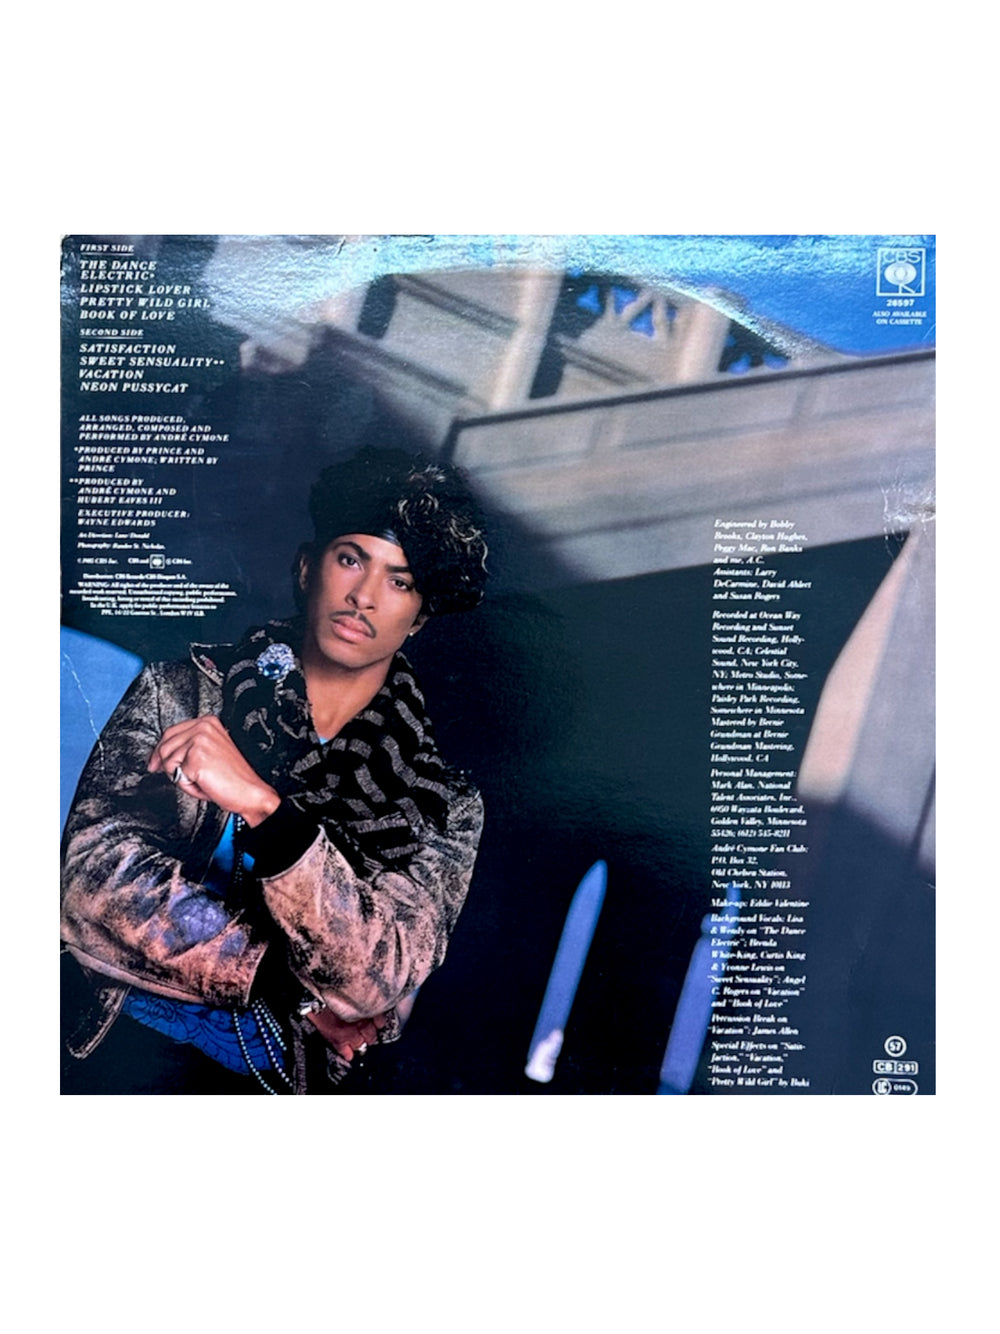 Prince – Andre Cymone AC Vinyl LP UK The Dance Electric Preloved: 1985